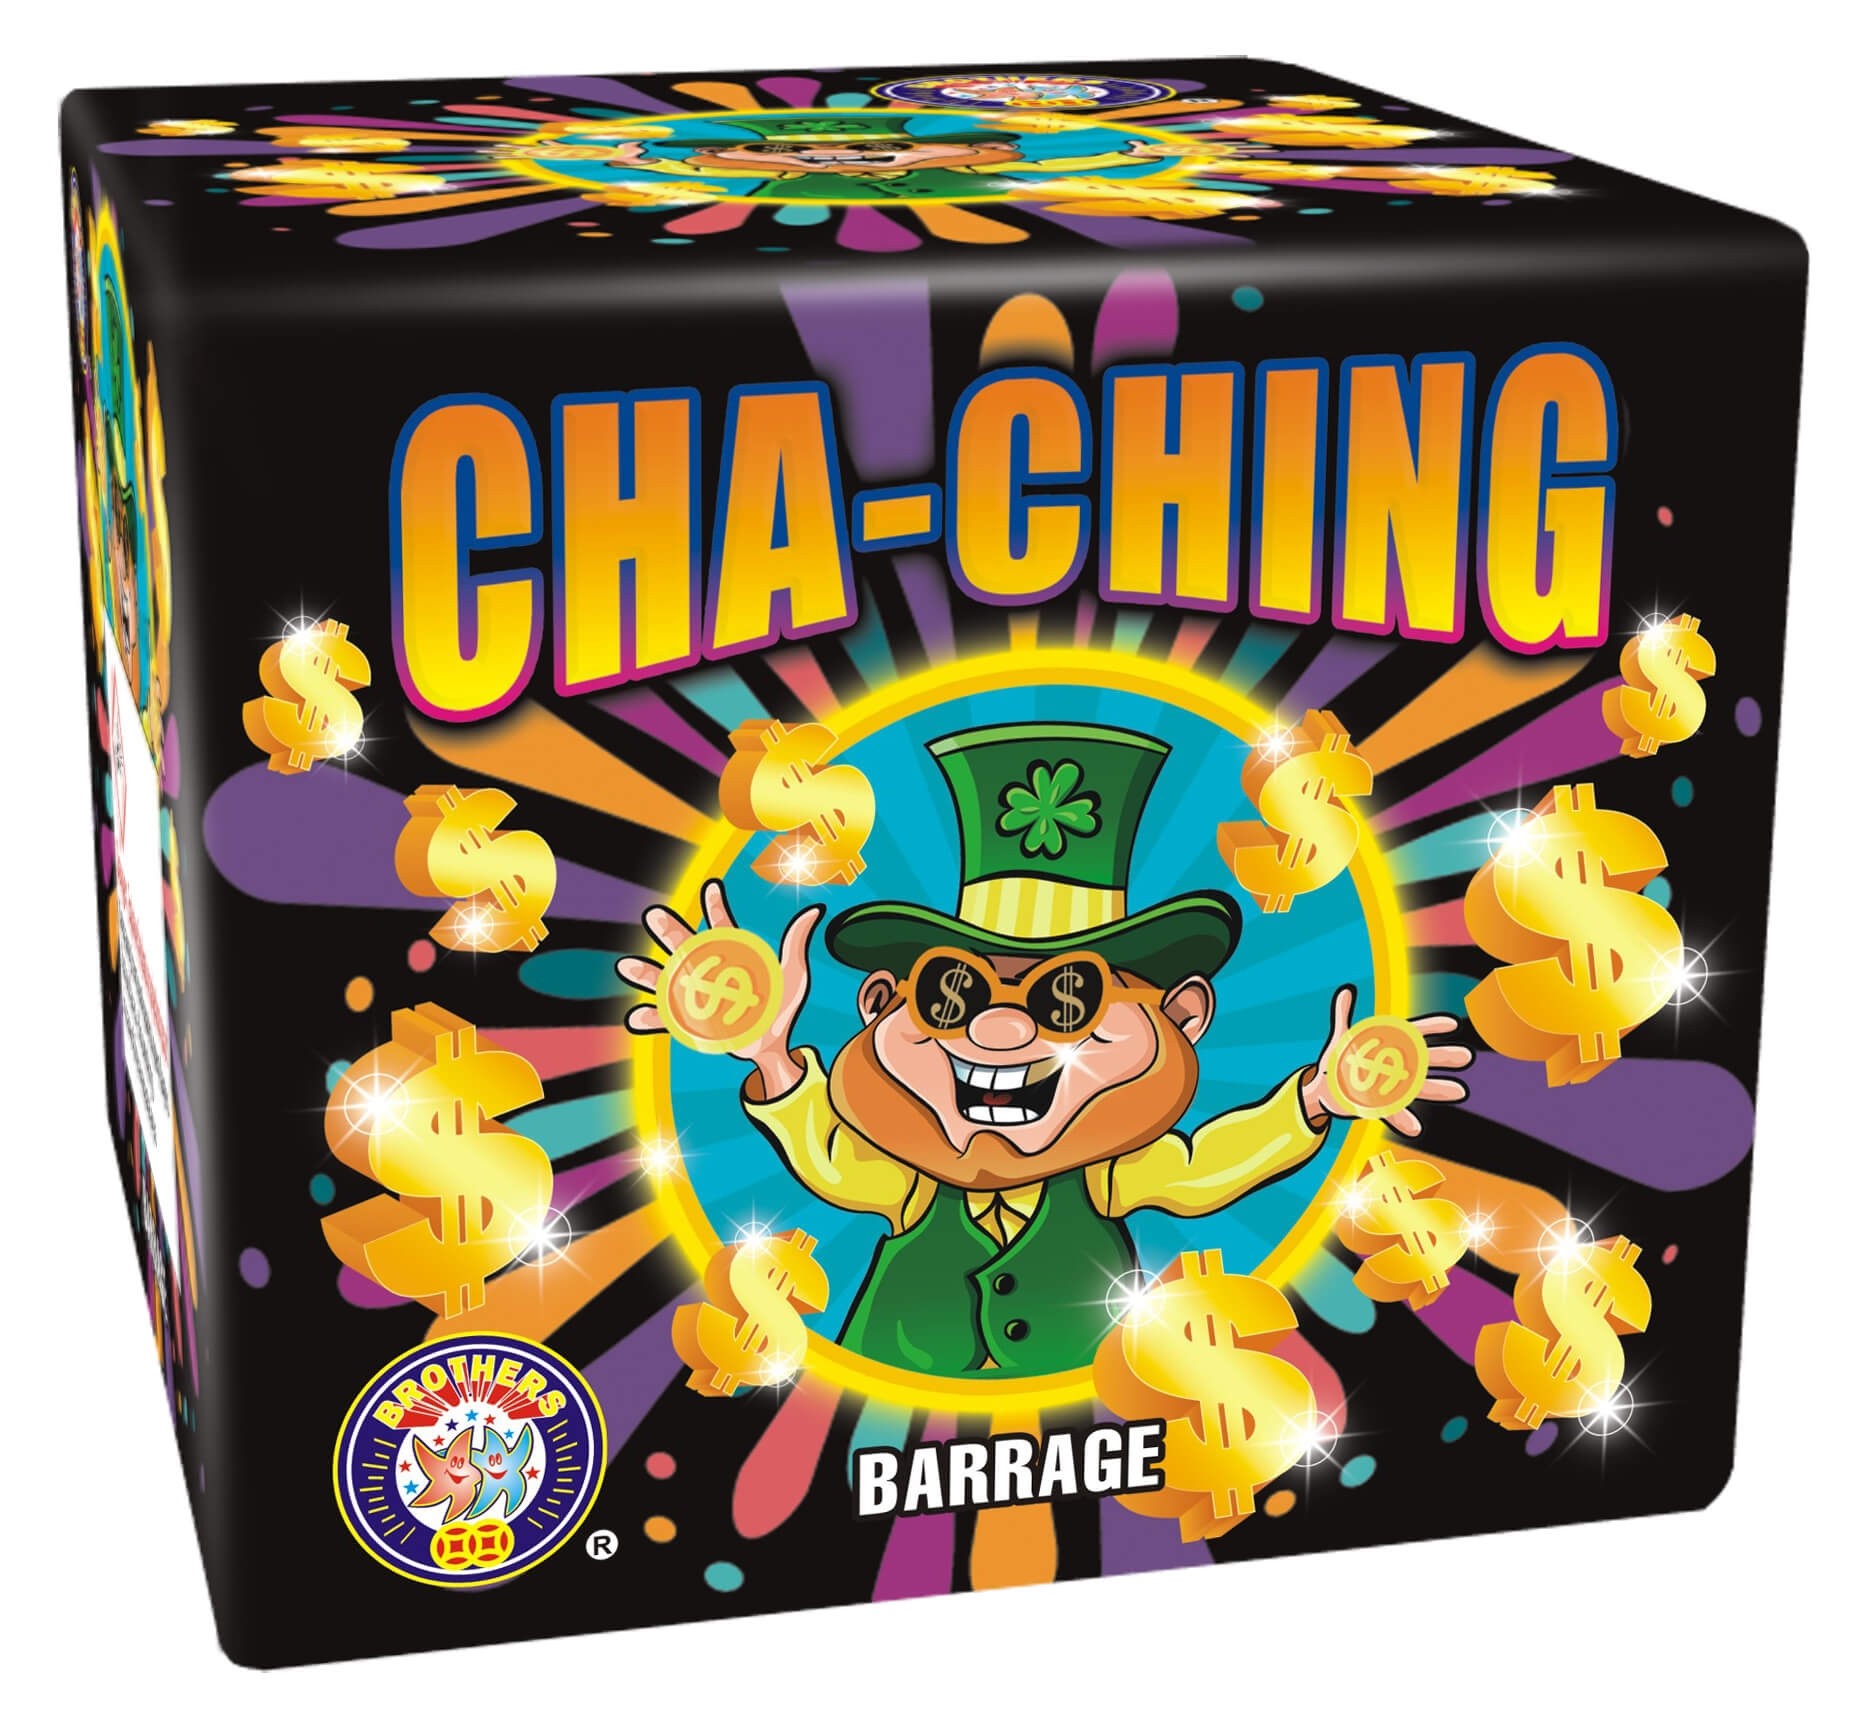 Cha-Ching by Brothers Pyrotechnics available at Fireworks Kingdom